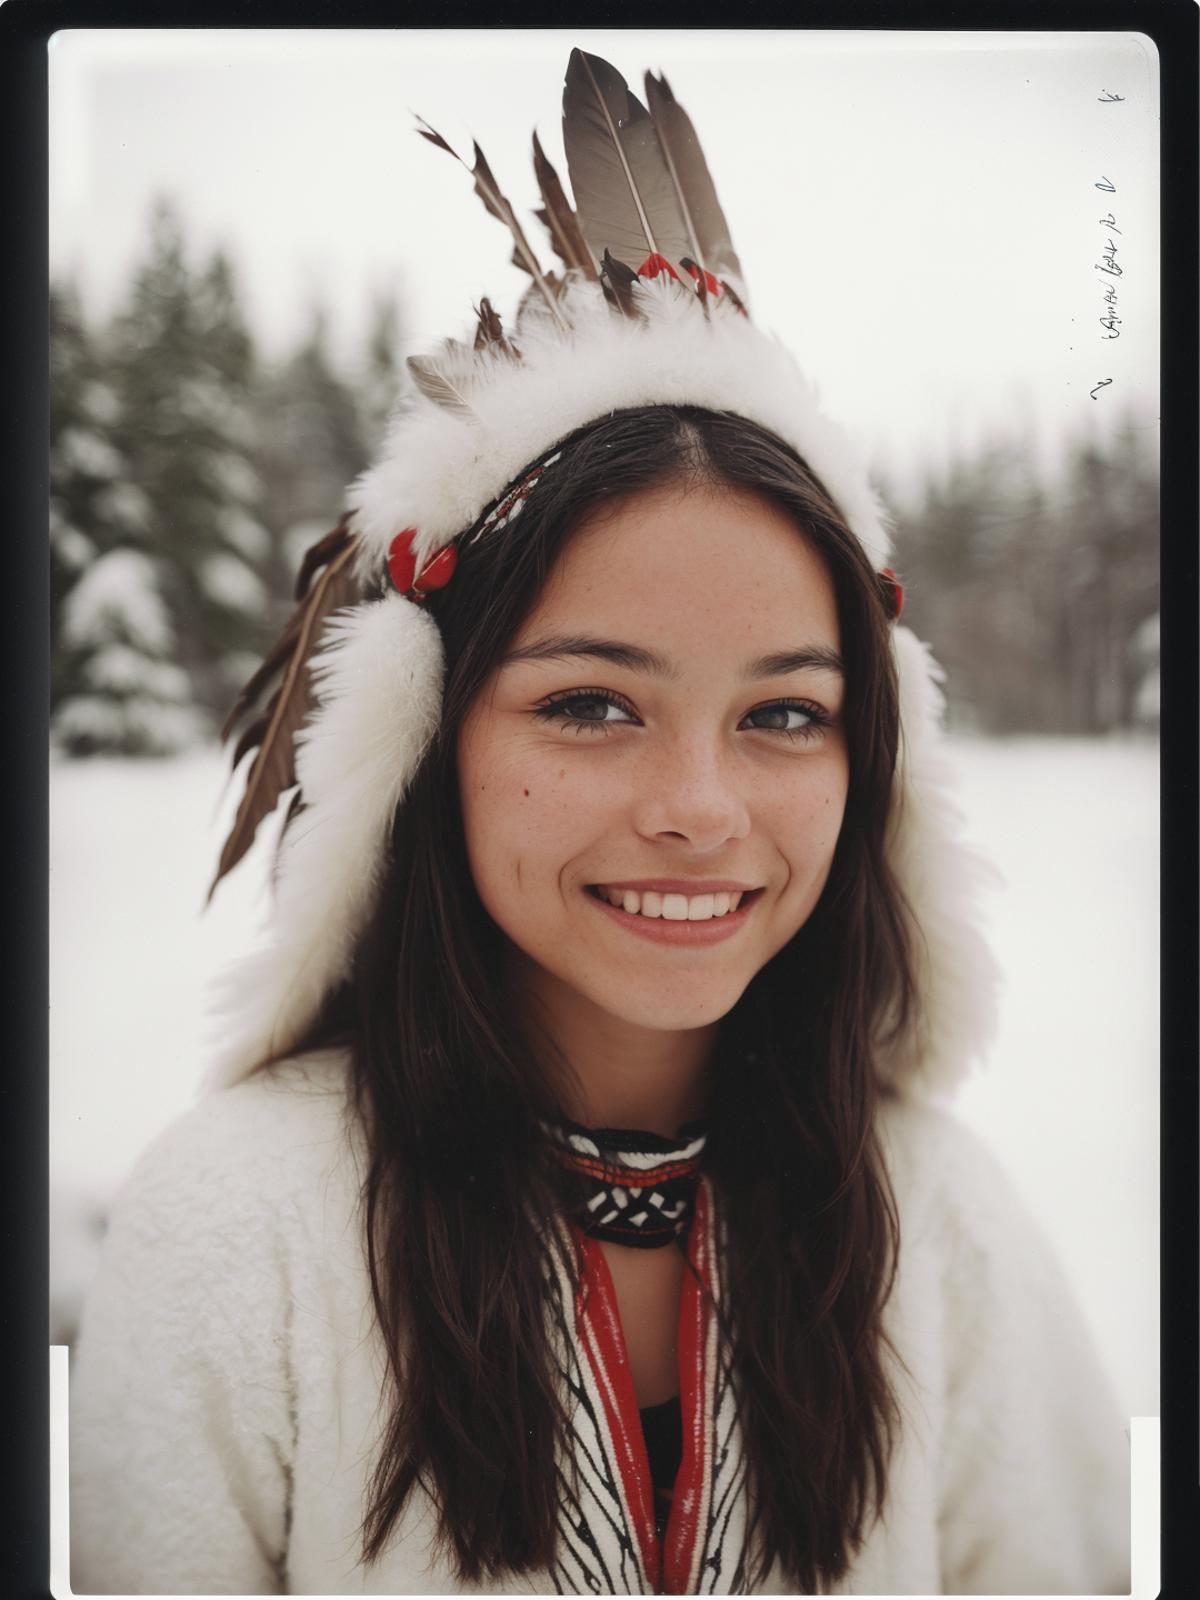 A young woman wearing a Native American headdress and a white coat.